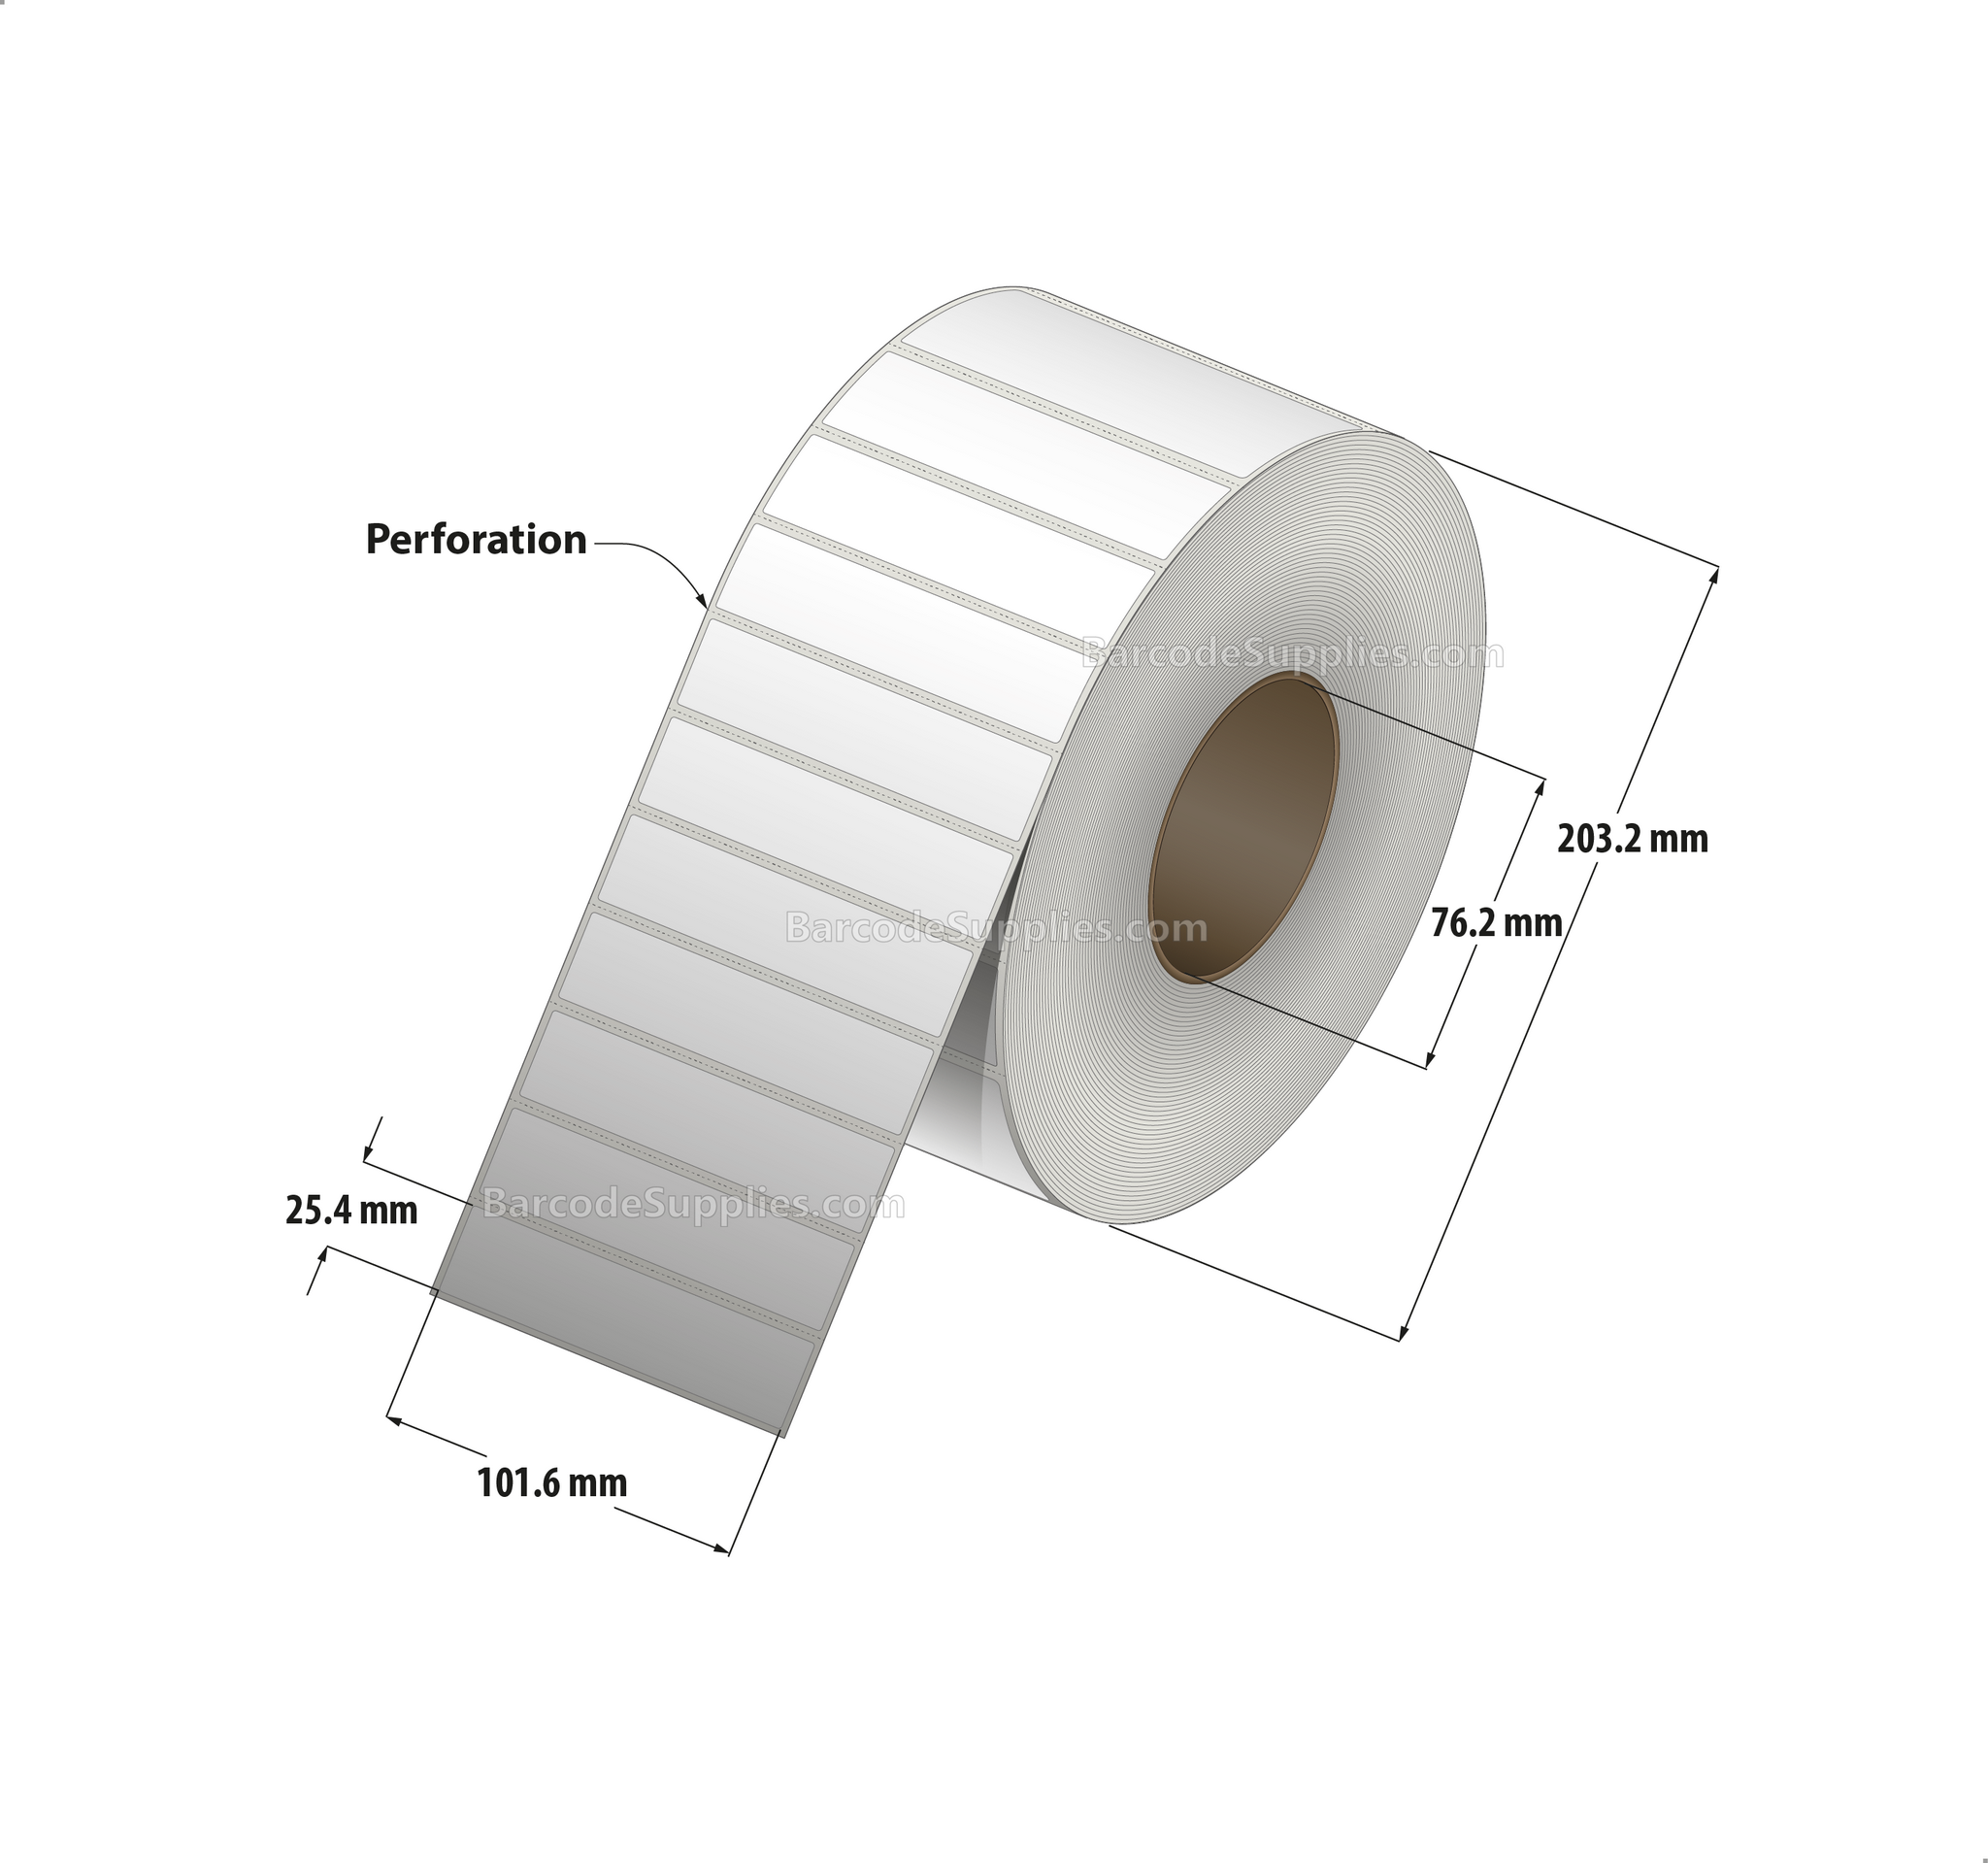 4 x 1 Thermal Transfer White Labels With Rubber Adhesive - Perforated - 5560 Labels Per Roll - Carton Of 4 Rolls - 22240 Labels Total - MPN: CTT400100-3P